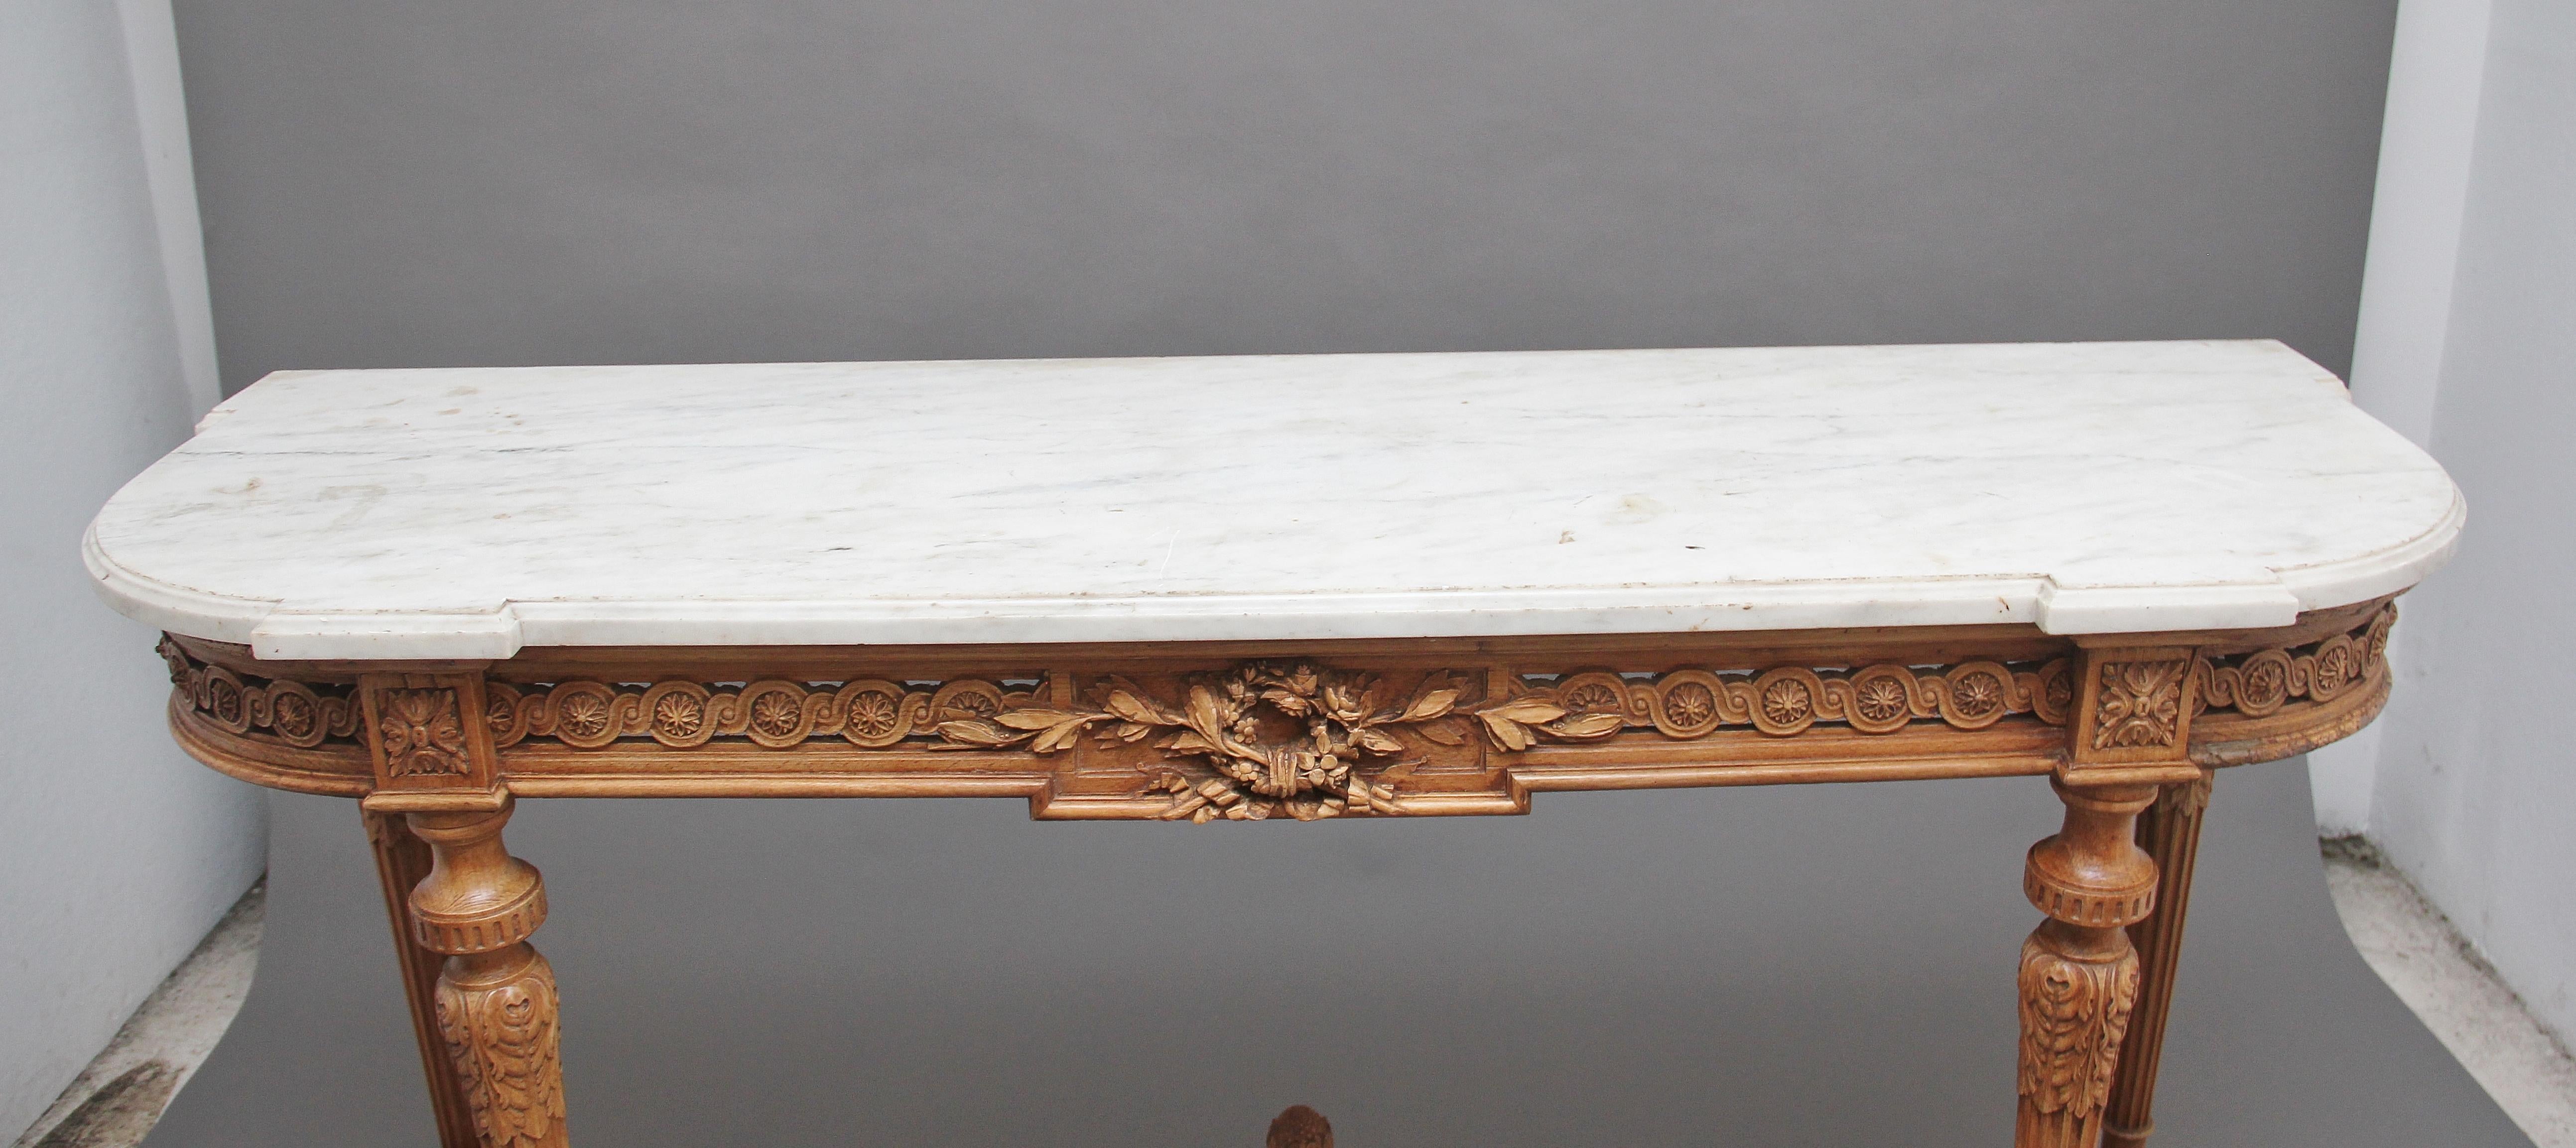 A superb quality 18th century carved pine console / serving table, having the original shaped and moulded white marble top resting on a profusely carved frieze incorporating carved patraes, circular floral carving and a central decorative floral